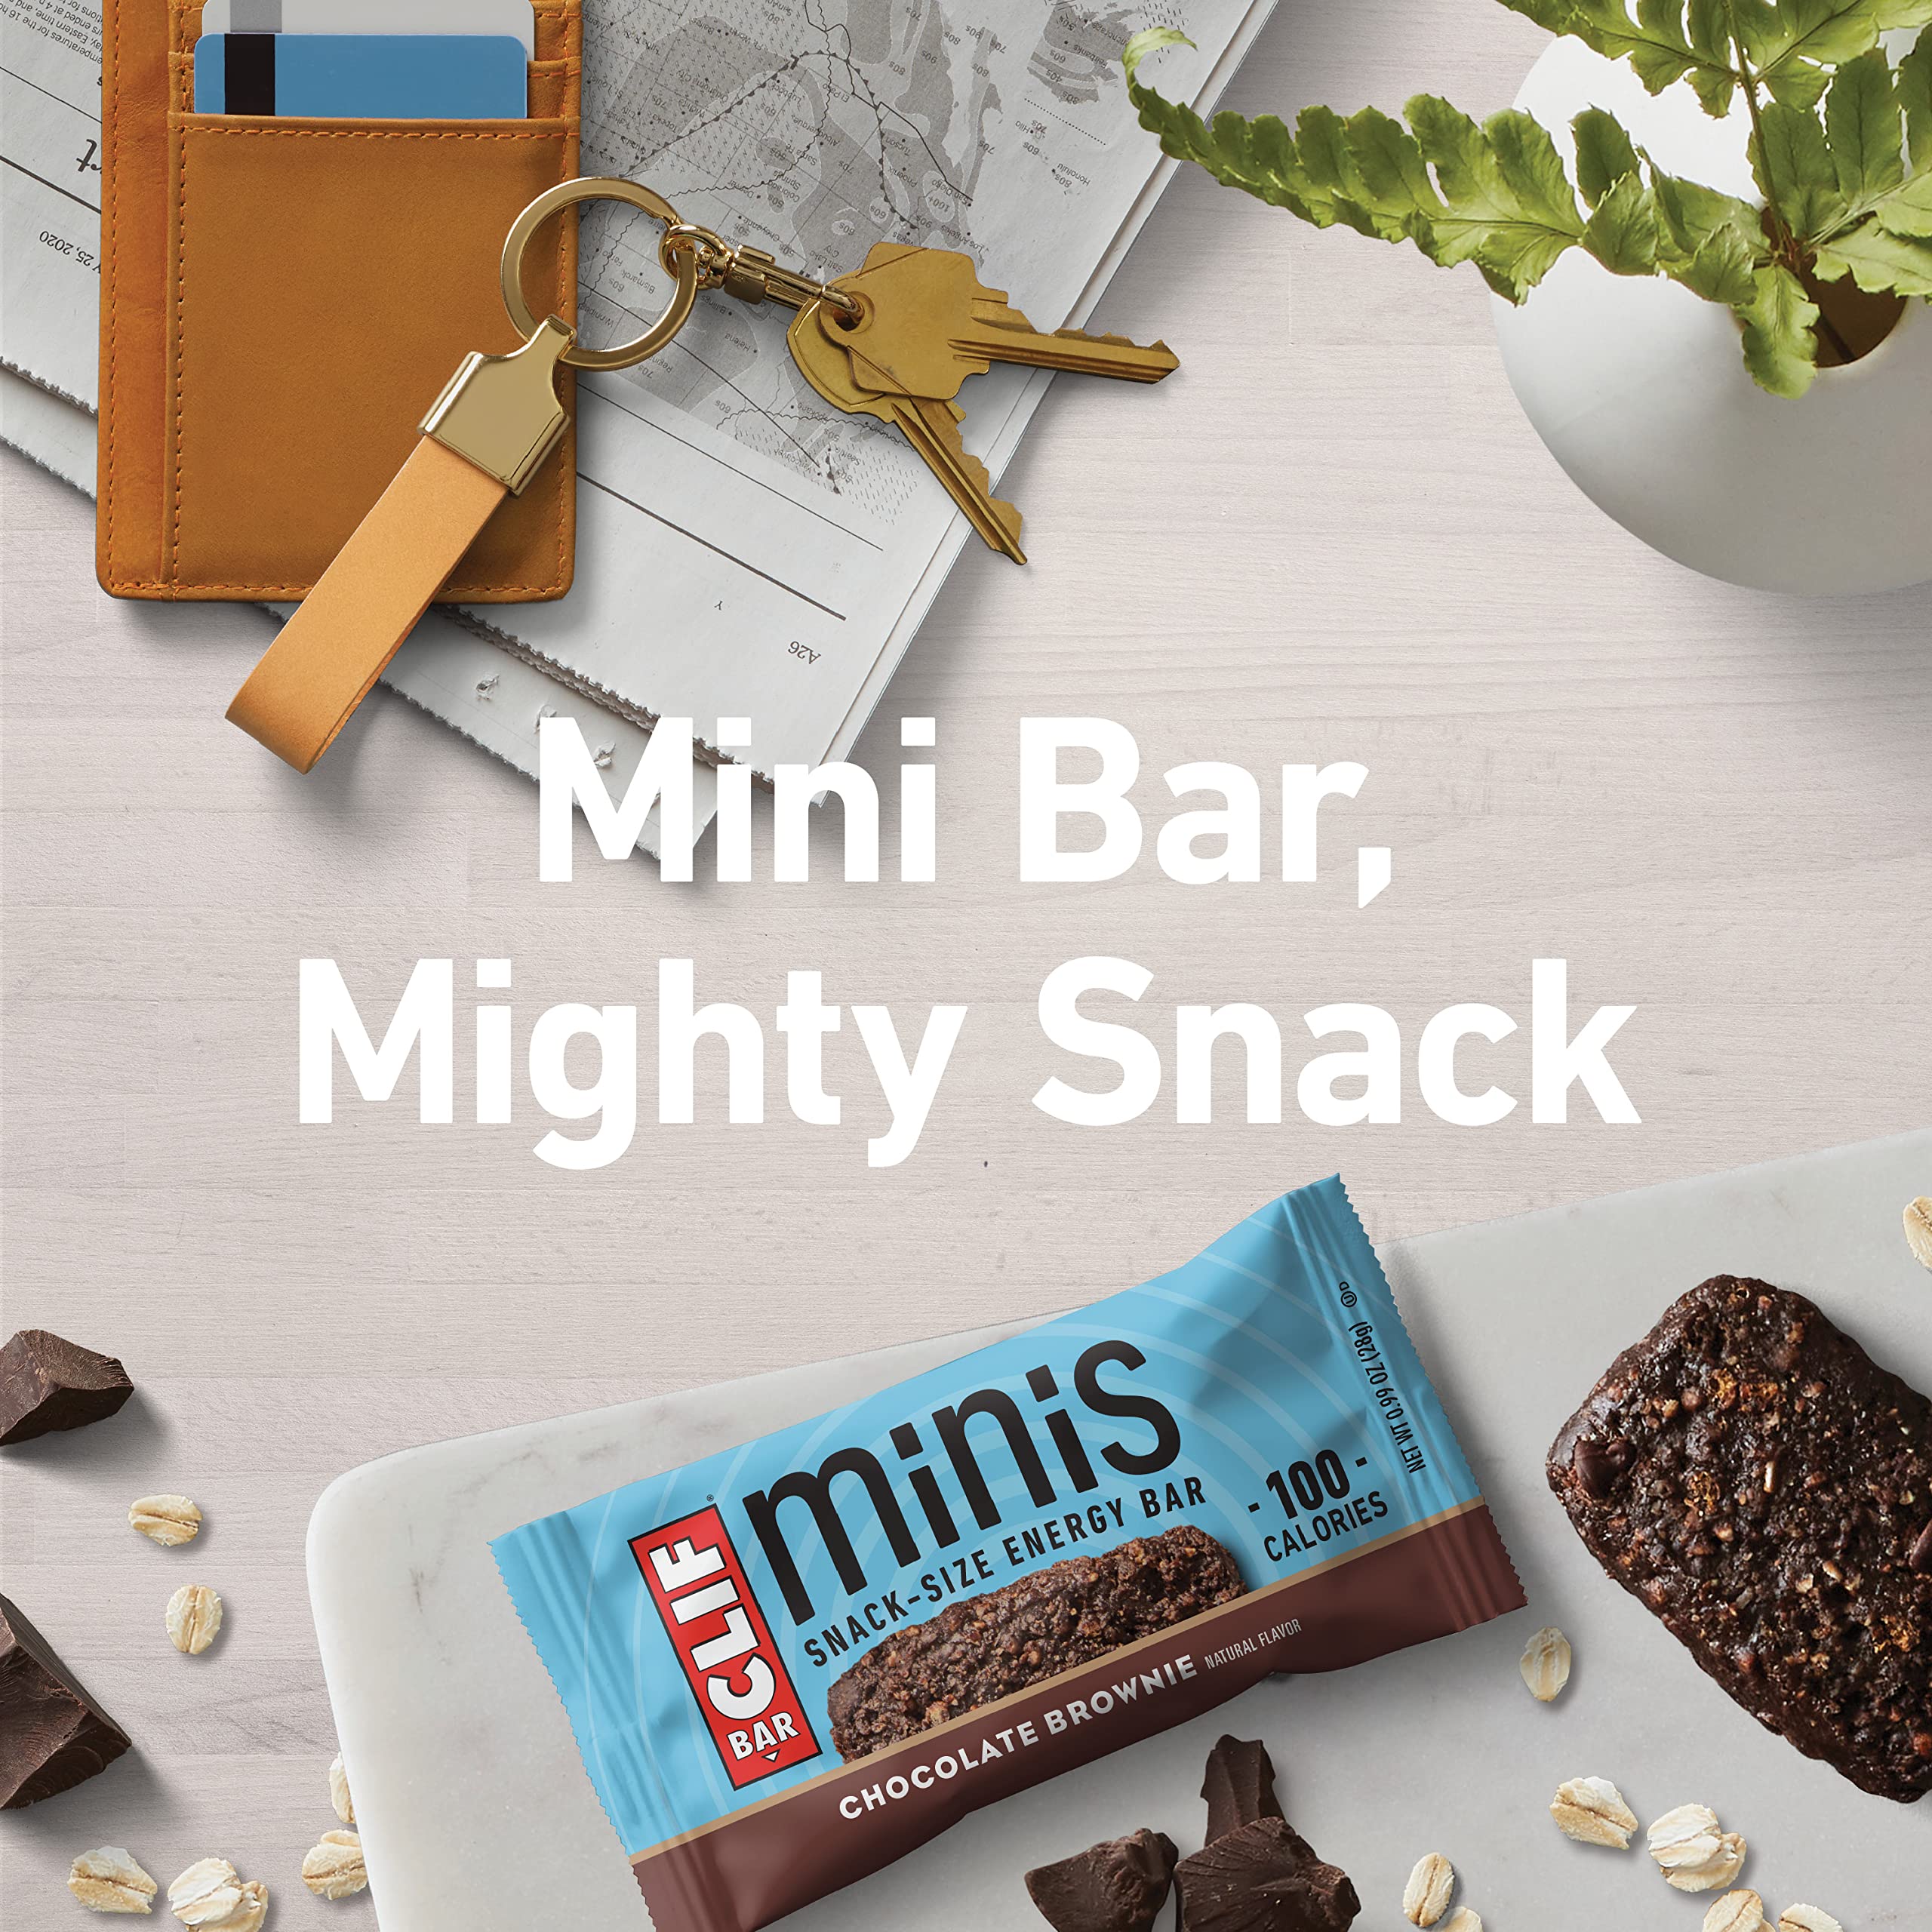 CLIF BARS - Chocolate Brownie - 10 Full Size and 10 Mini Energy Bars - Made with Organic Oats - Plant Based Food - Vegetarian - Kosher (2.4oz and 0.99oz Protein Bars, 20 Count) Amazon Exclusive